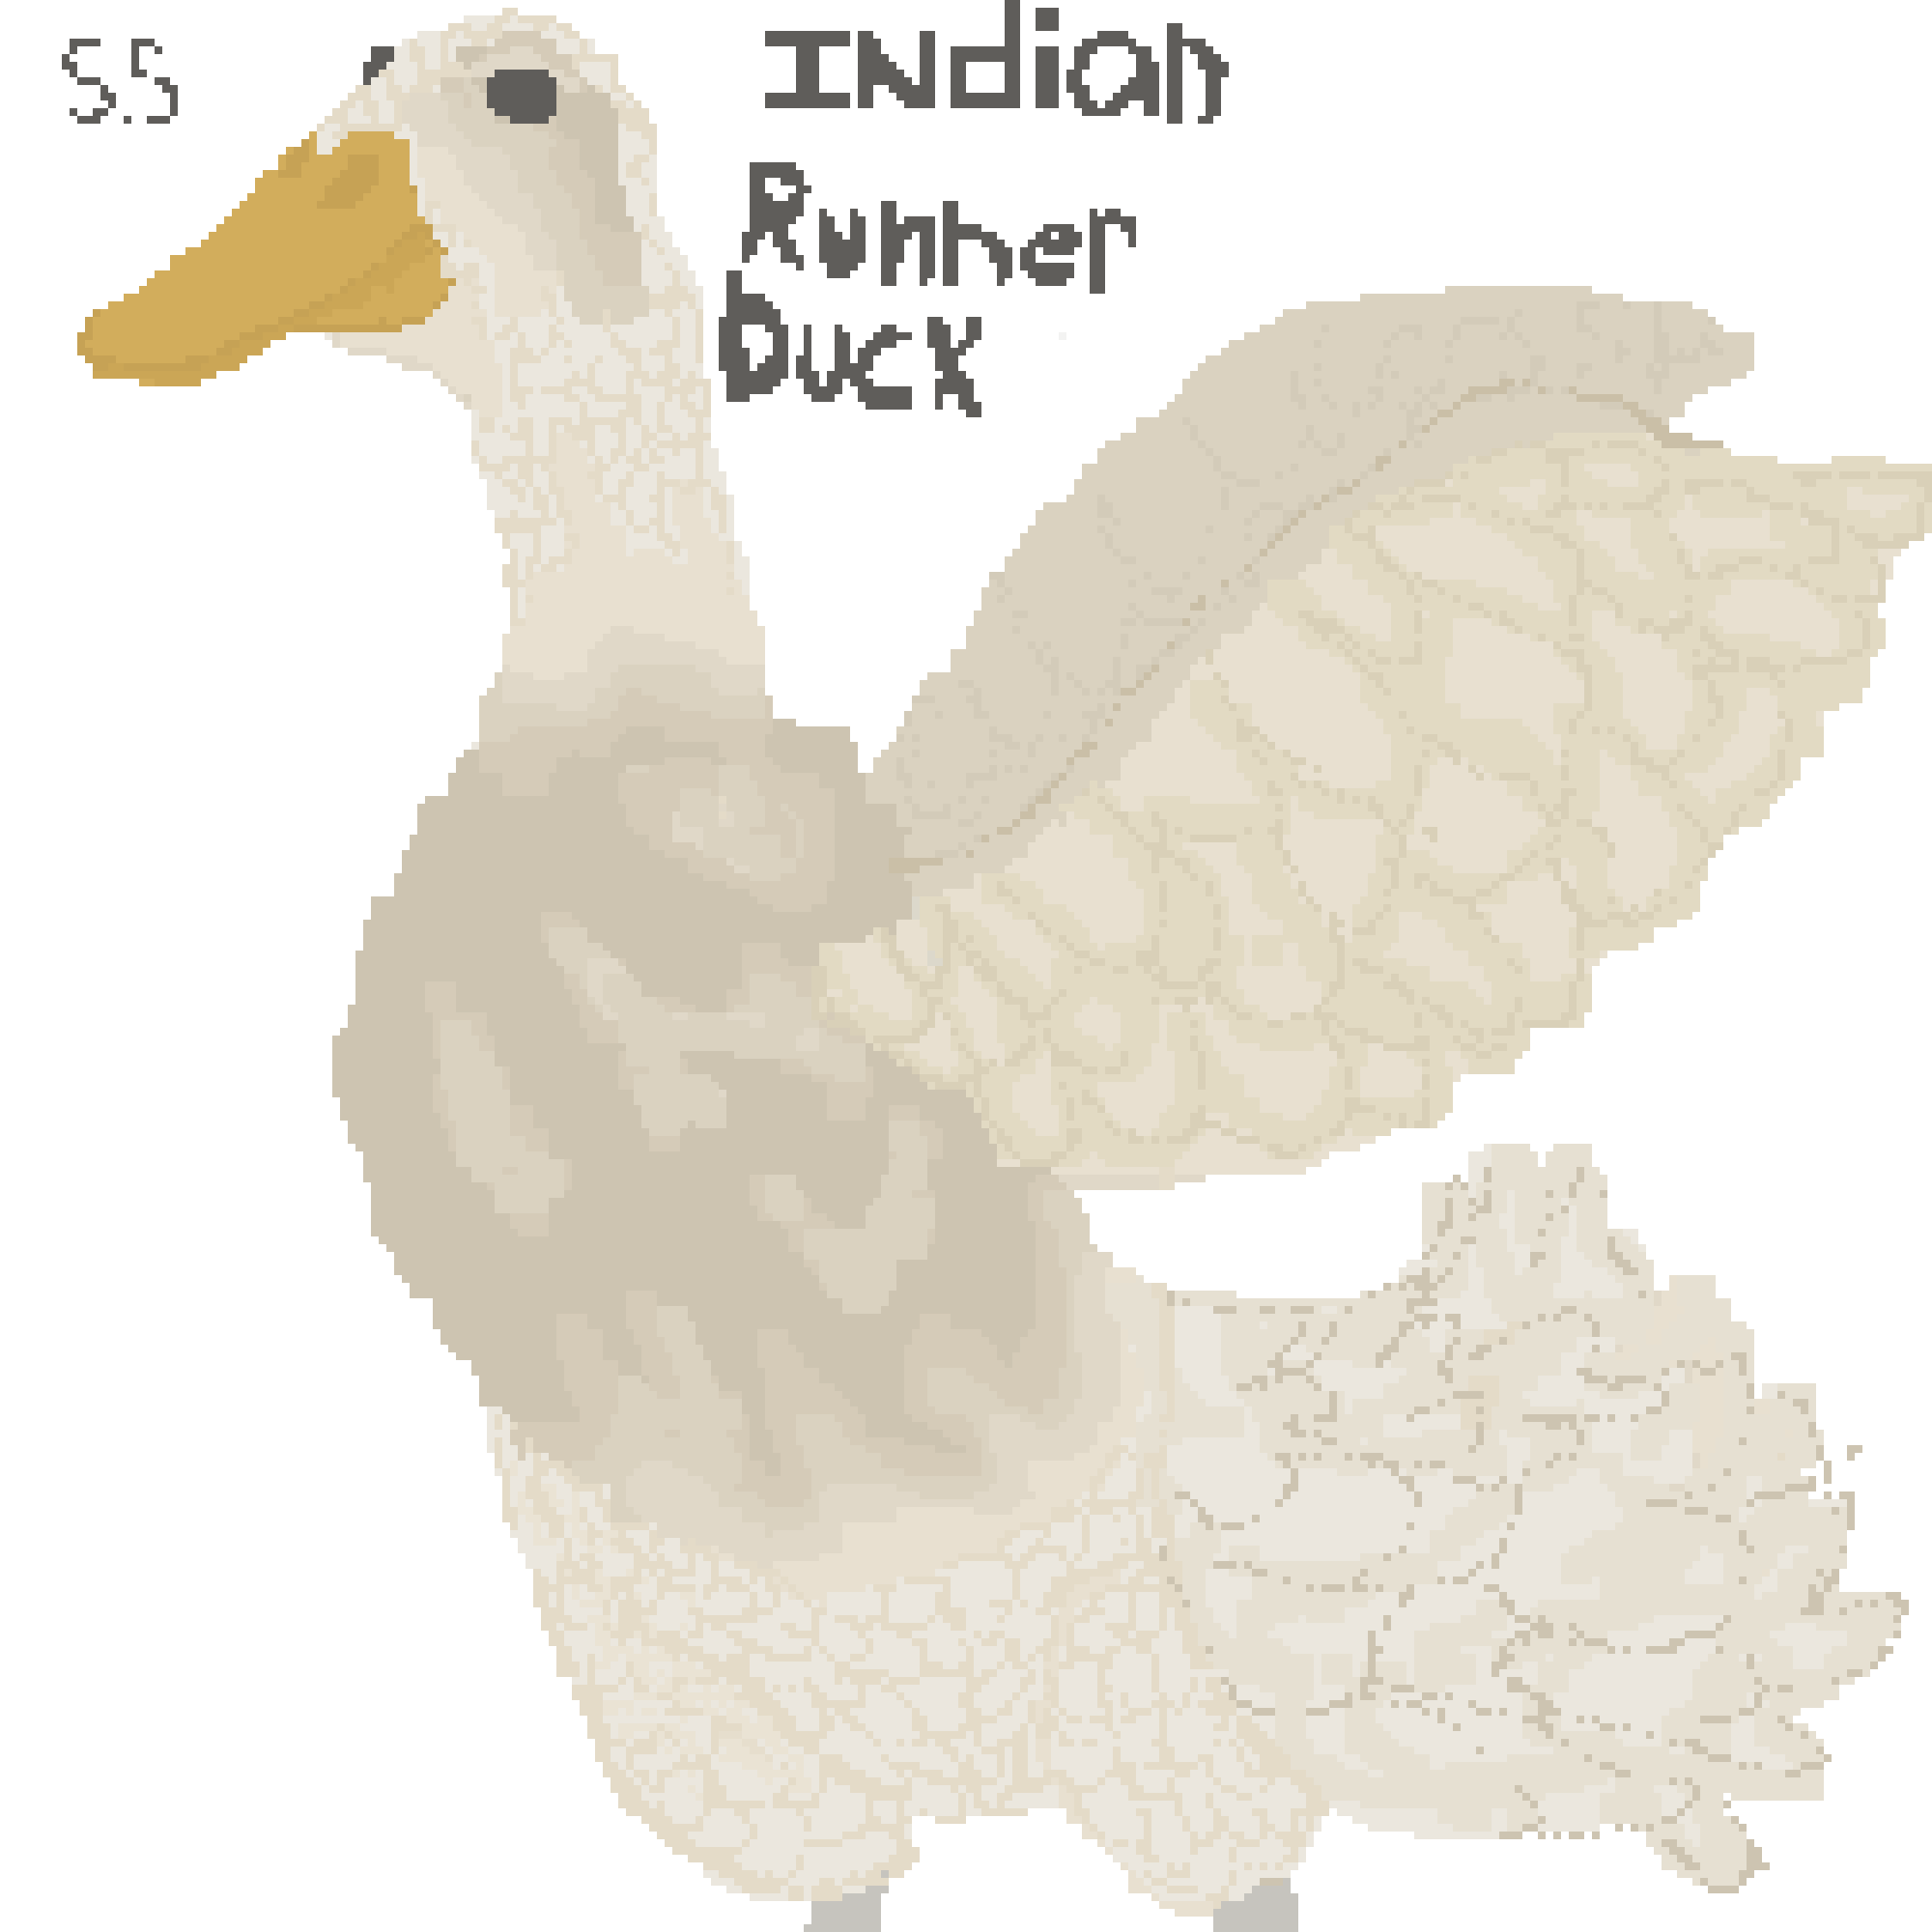 Indian Runner Duck (By S.Stan / 779926) (Editable version)